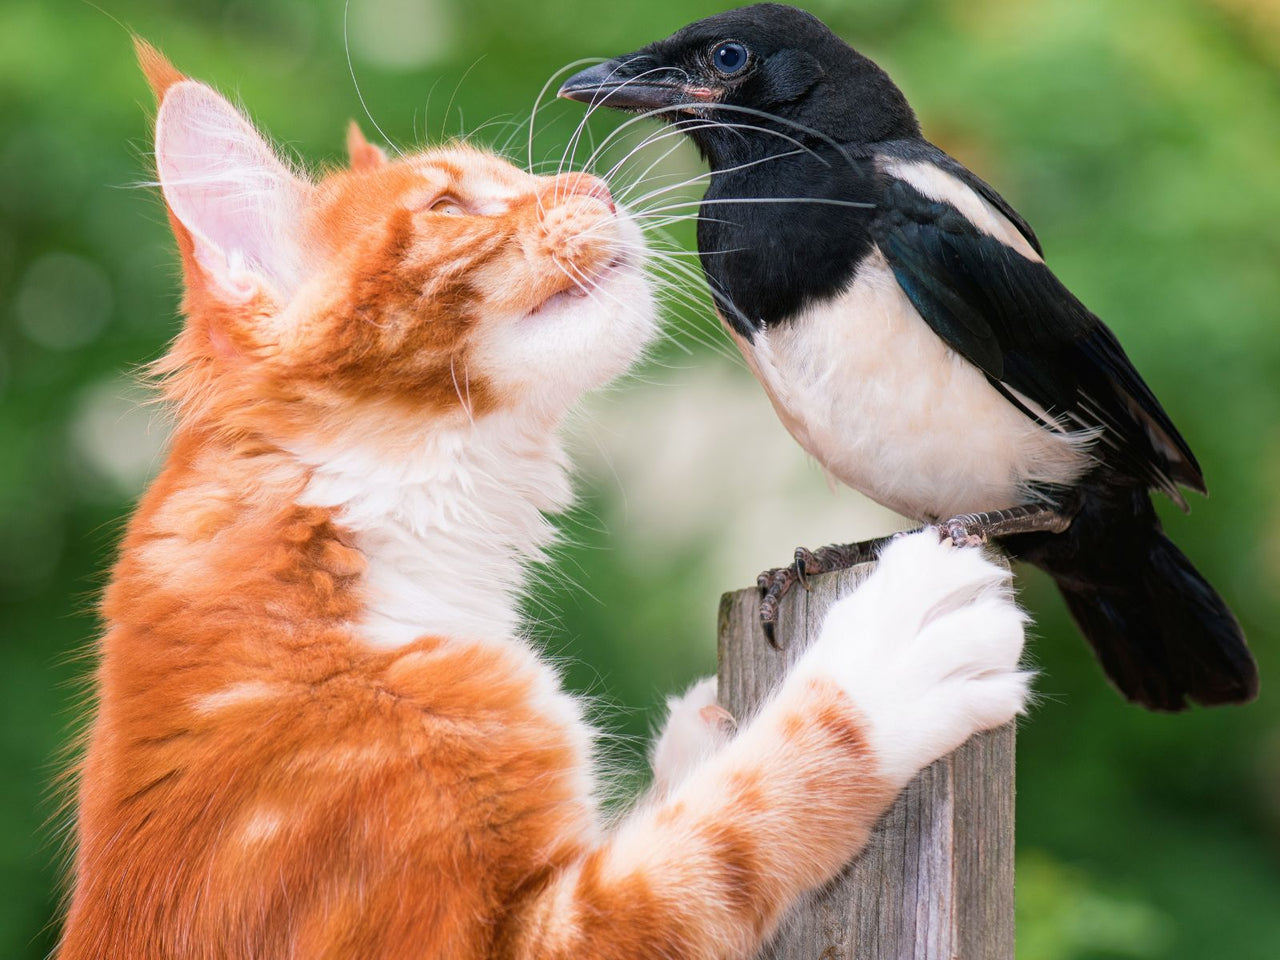 Do Cats Eat Birds Or Hunt Them Just For Fun?